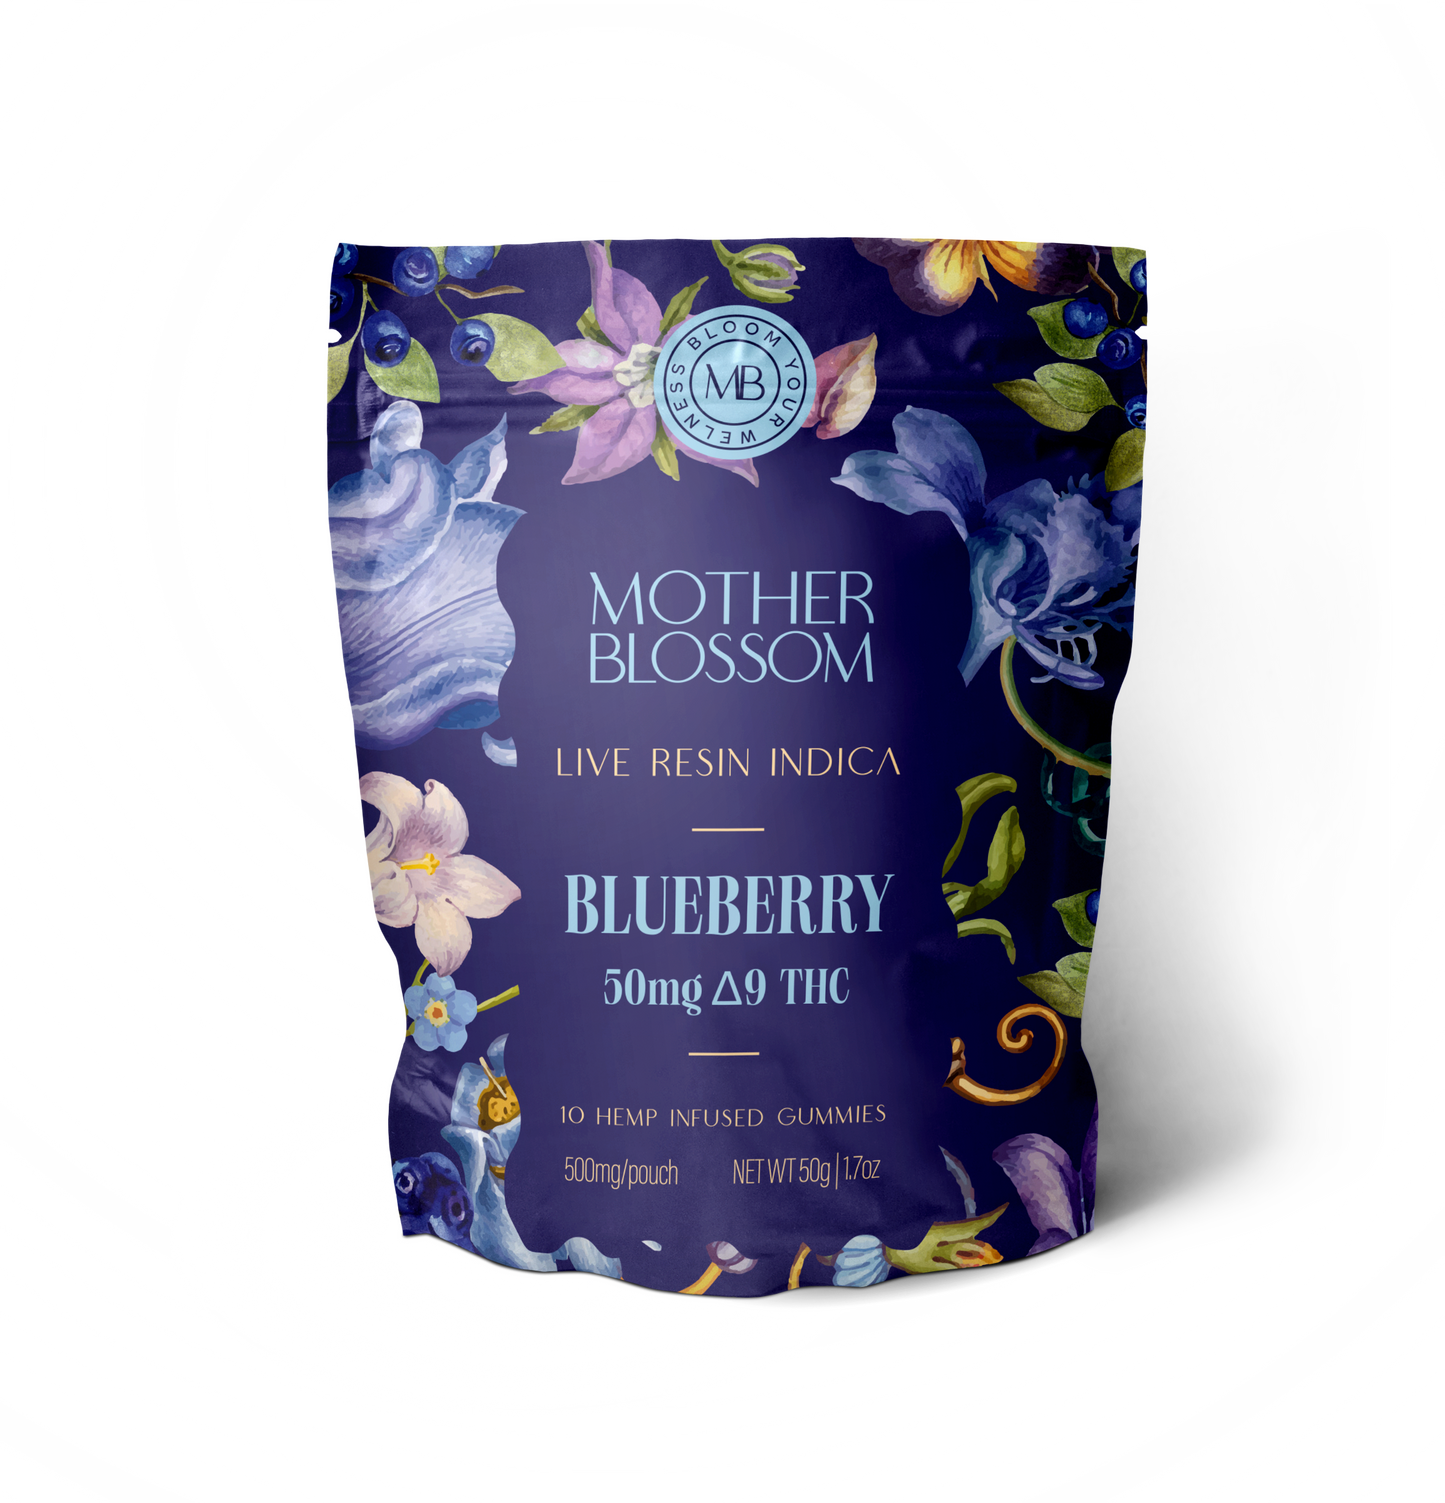 Mother Blossom Blueberry Gummies